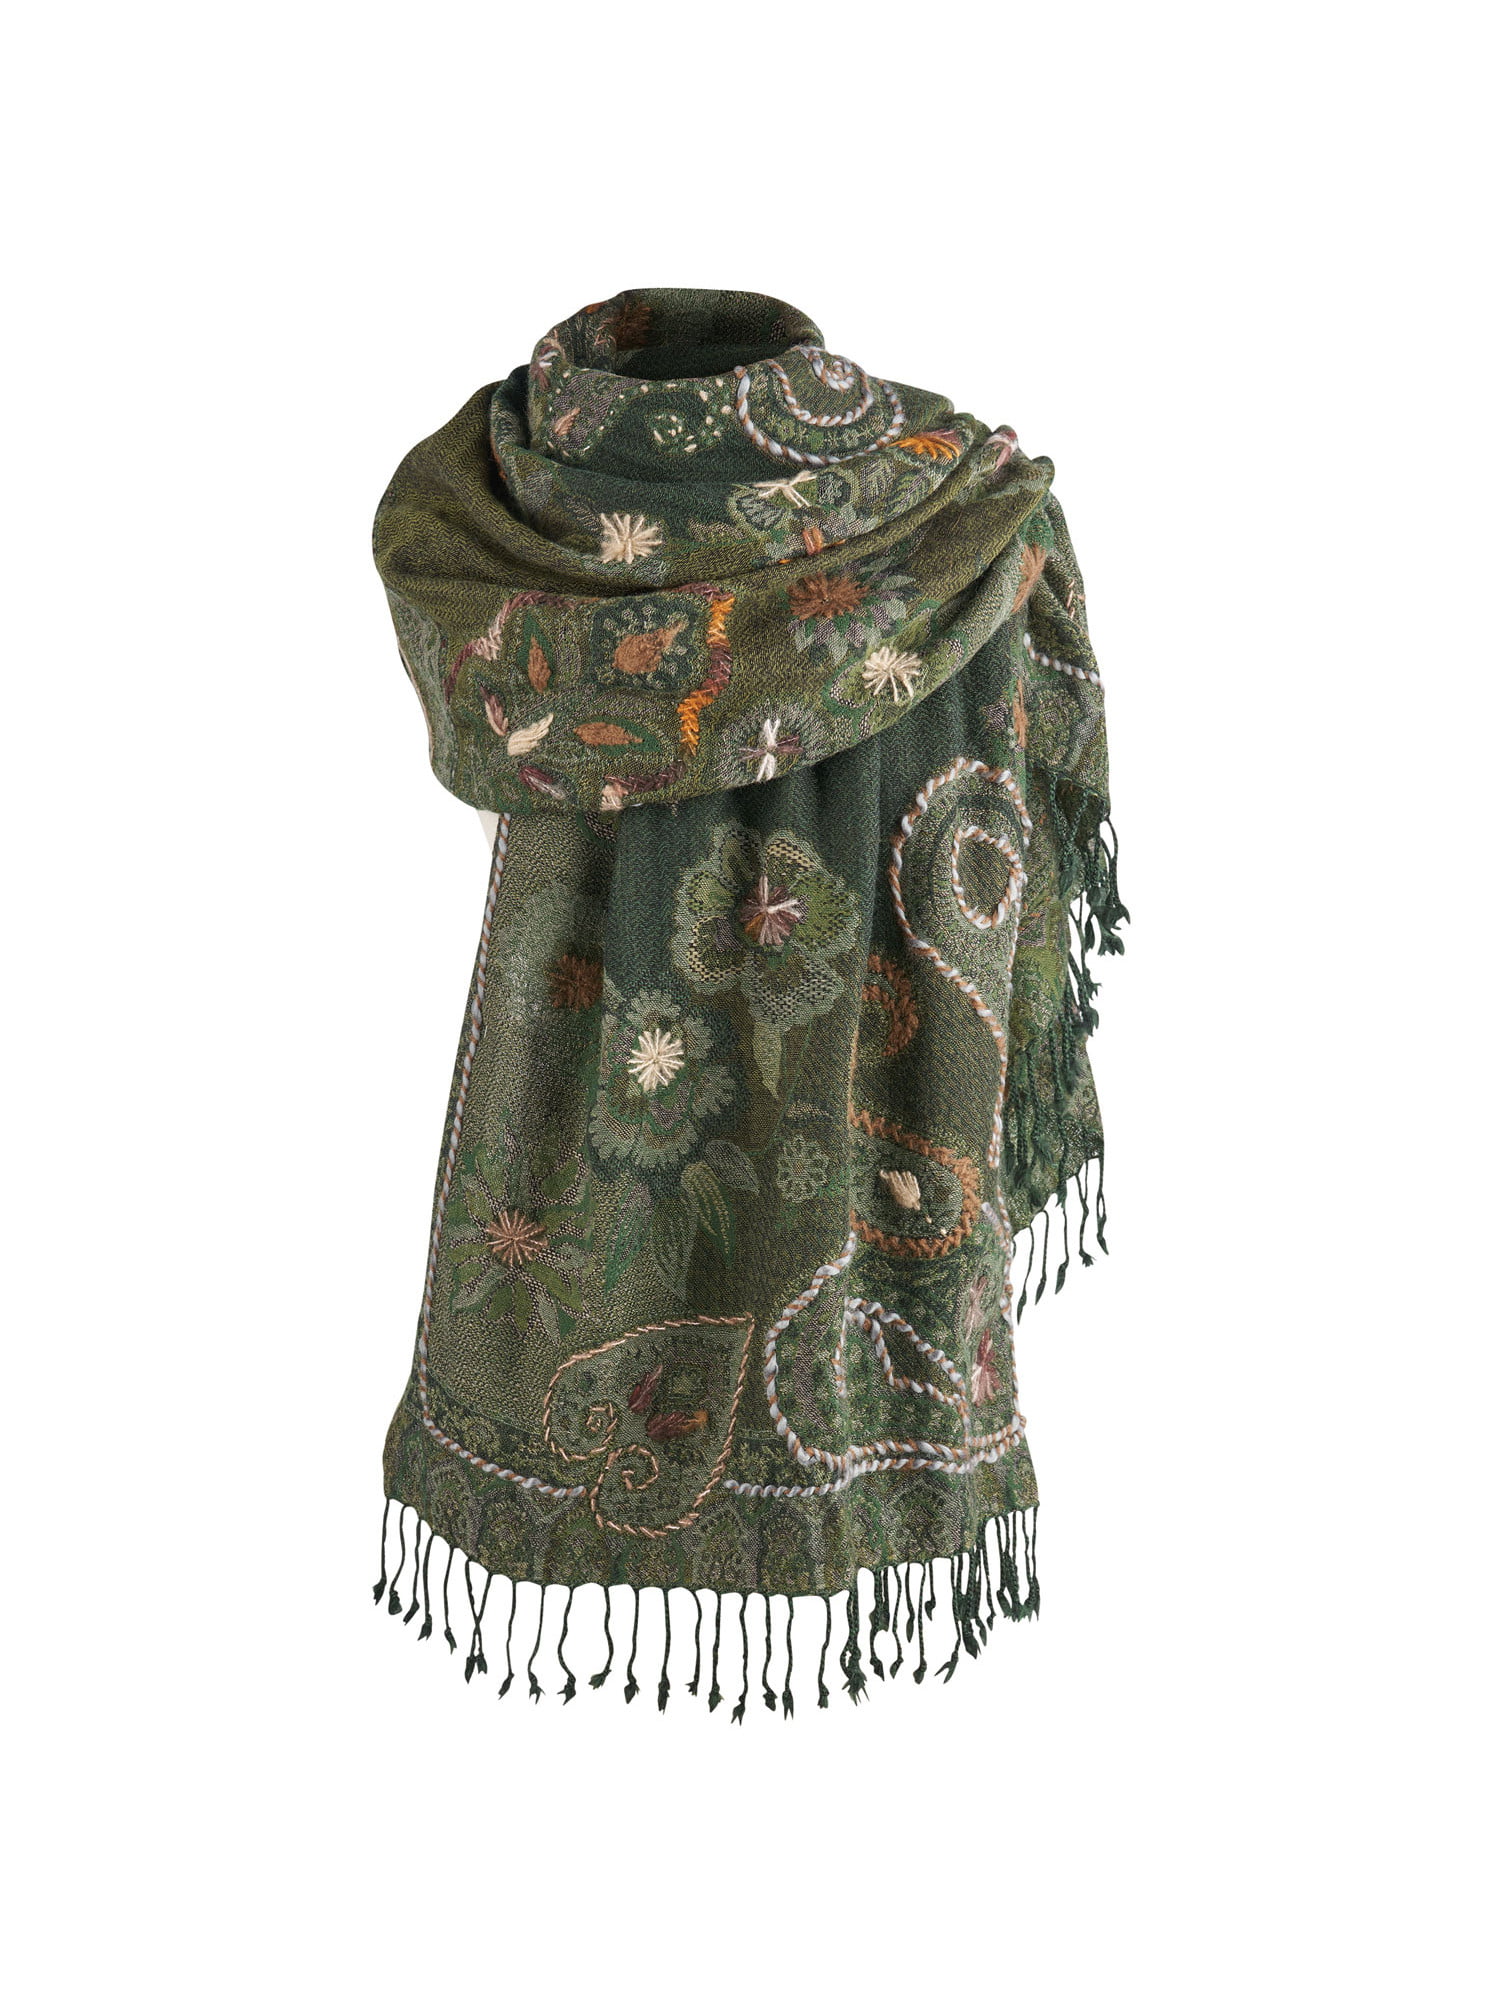 Women's All Seasons Floral Embroidery Large Scarf Shawl with Fringe. 